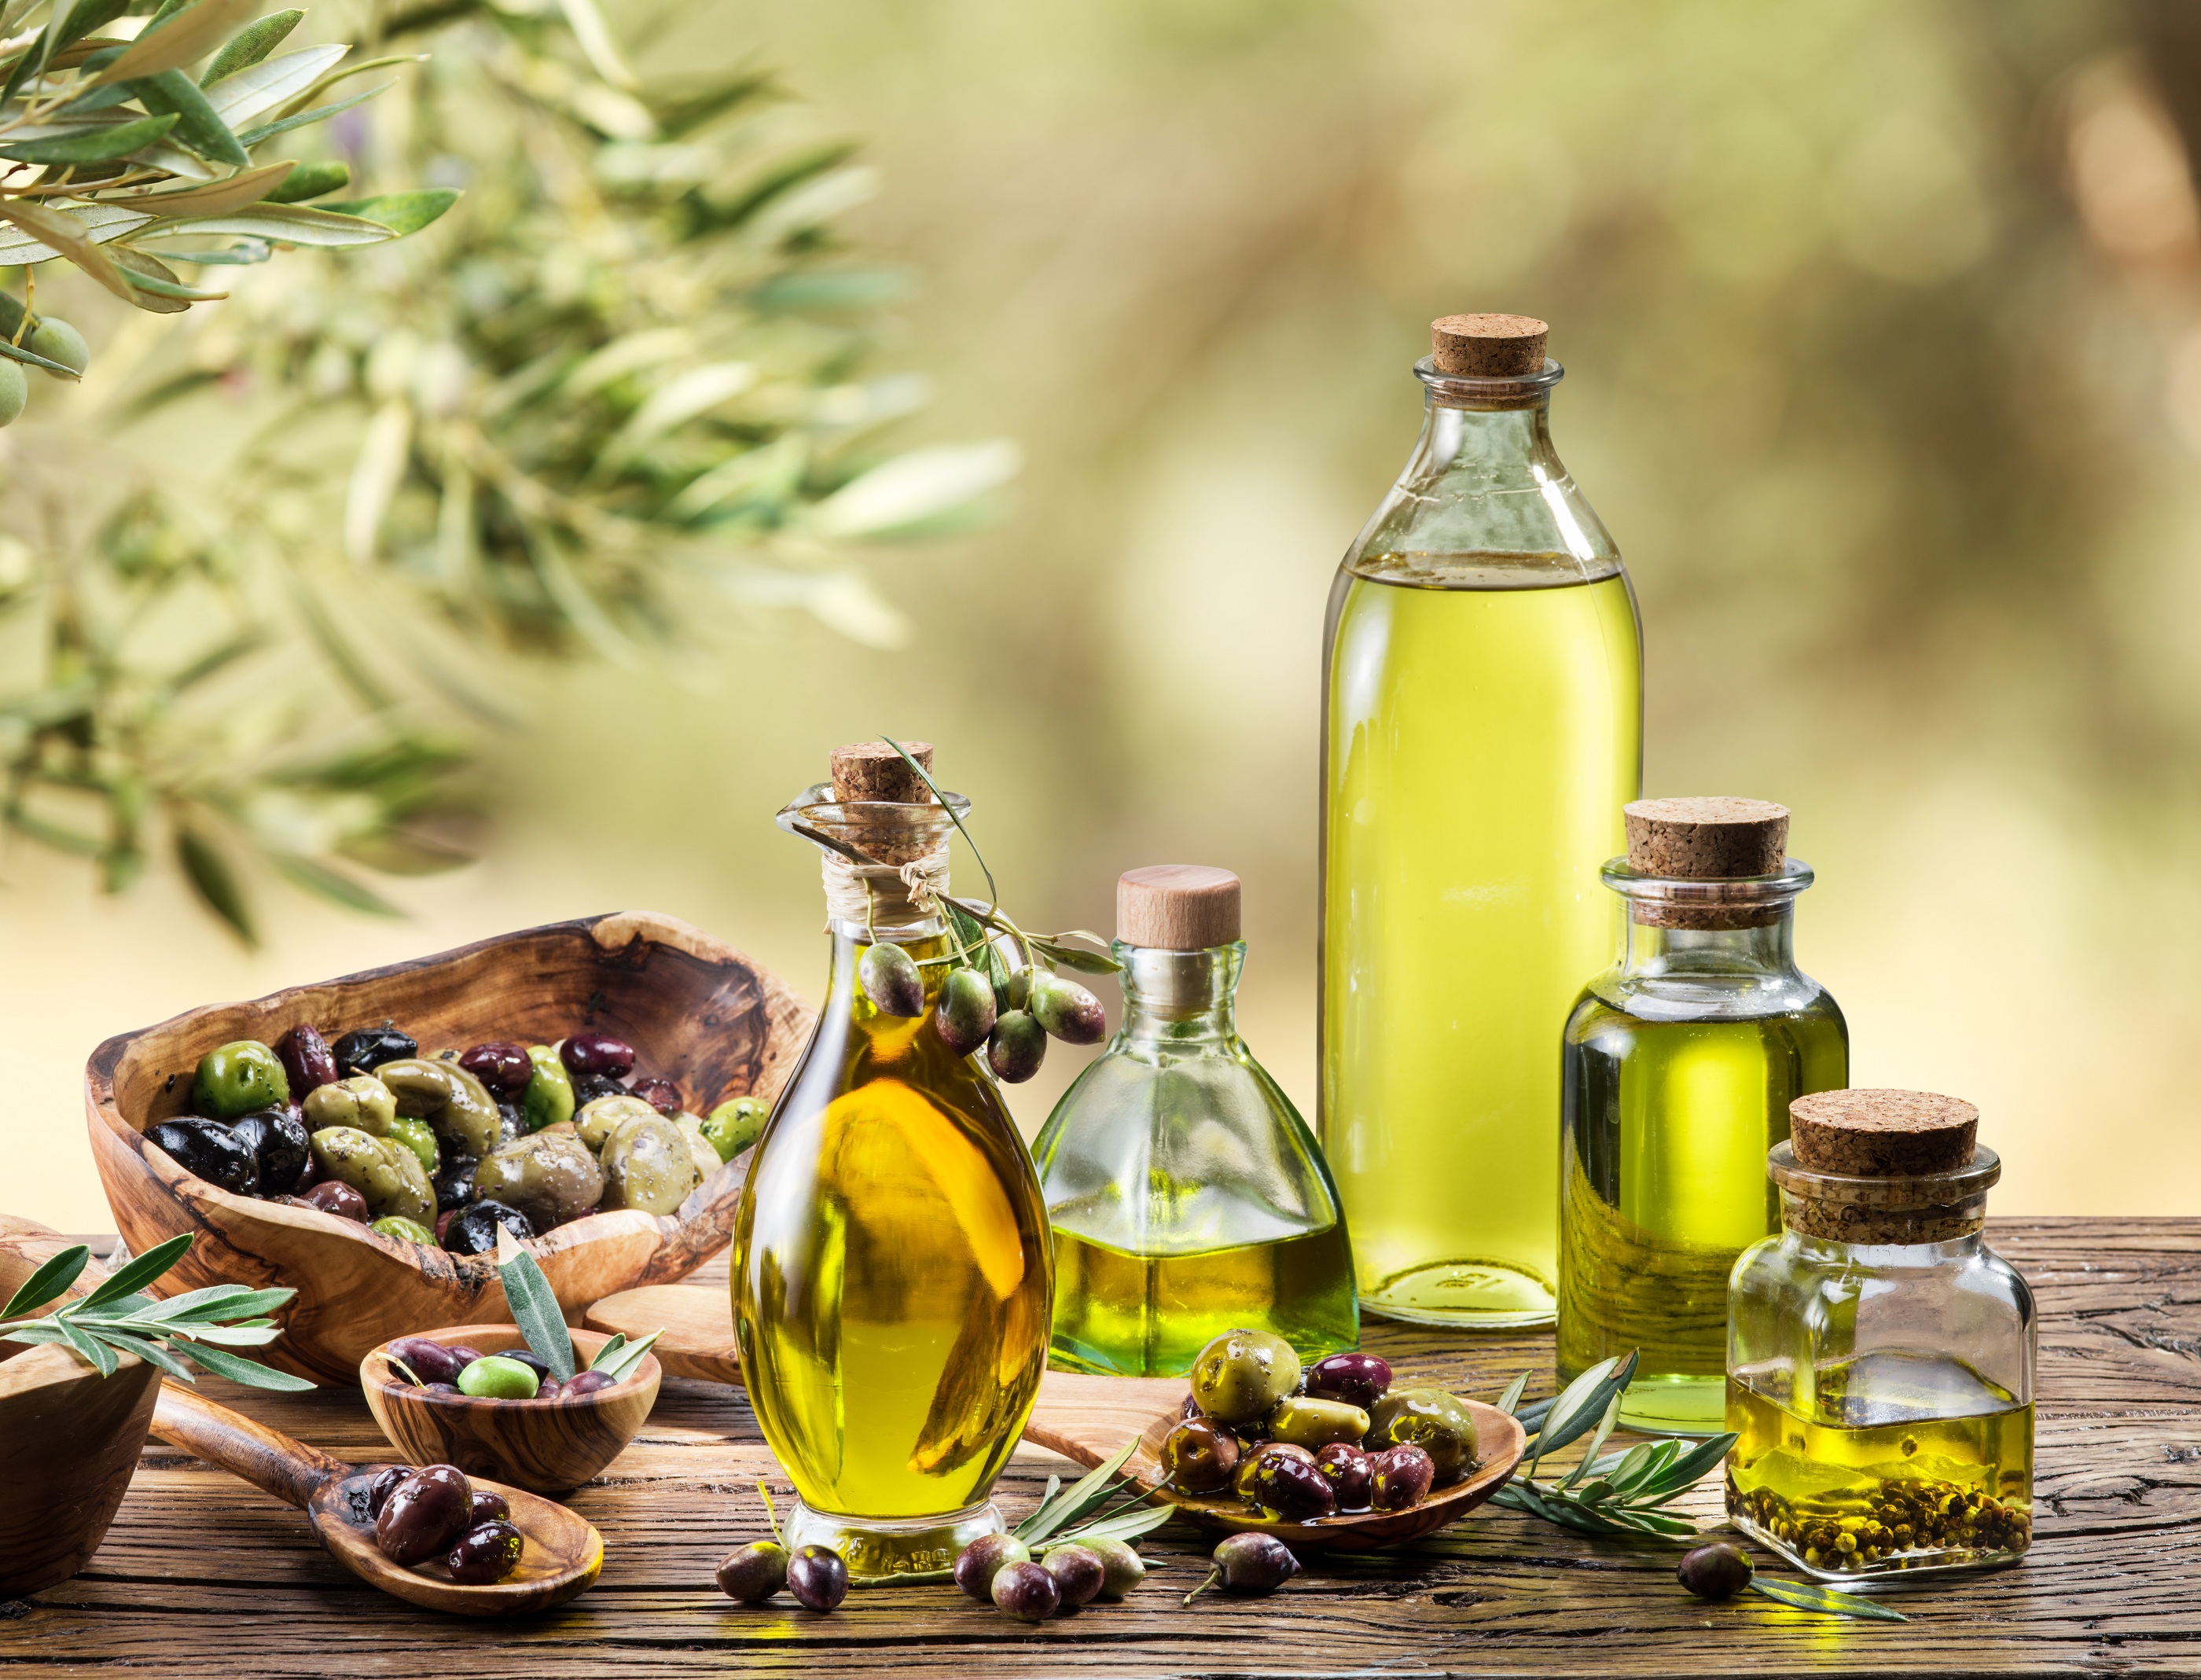 https://www.marketplace.org/wp-content/uploads/2023/12/oliveoil.jpg?fit=2800%2C2137